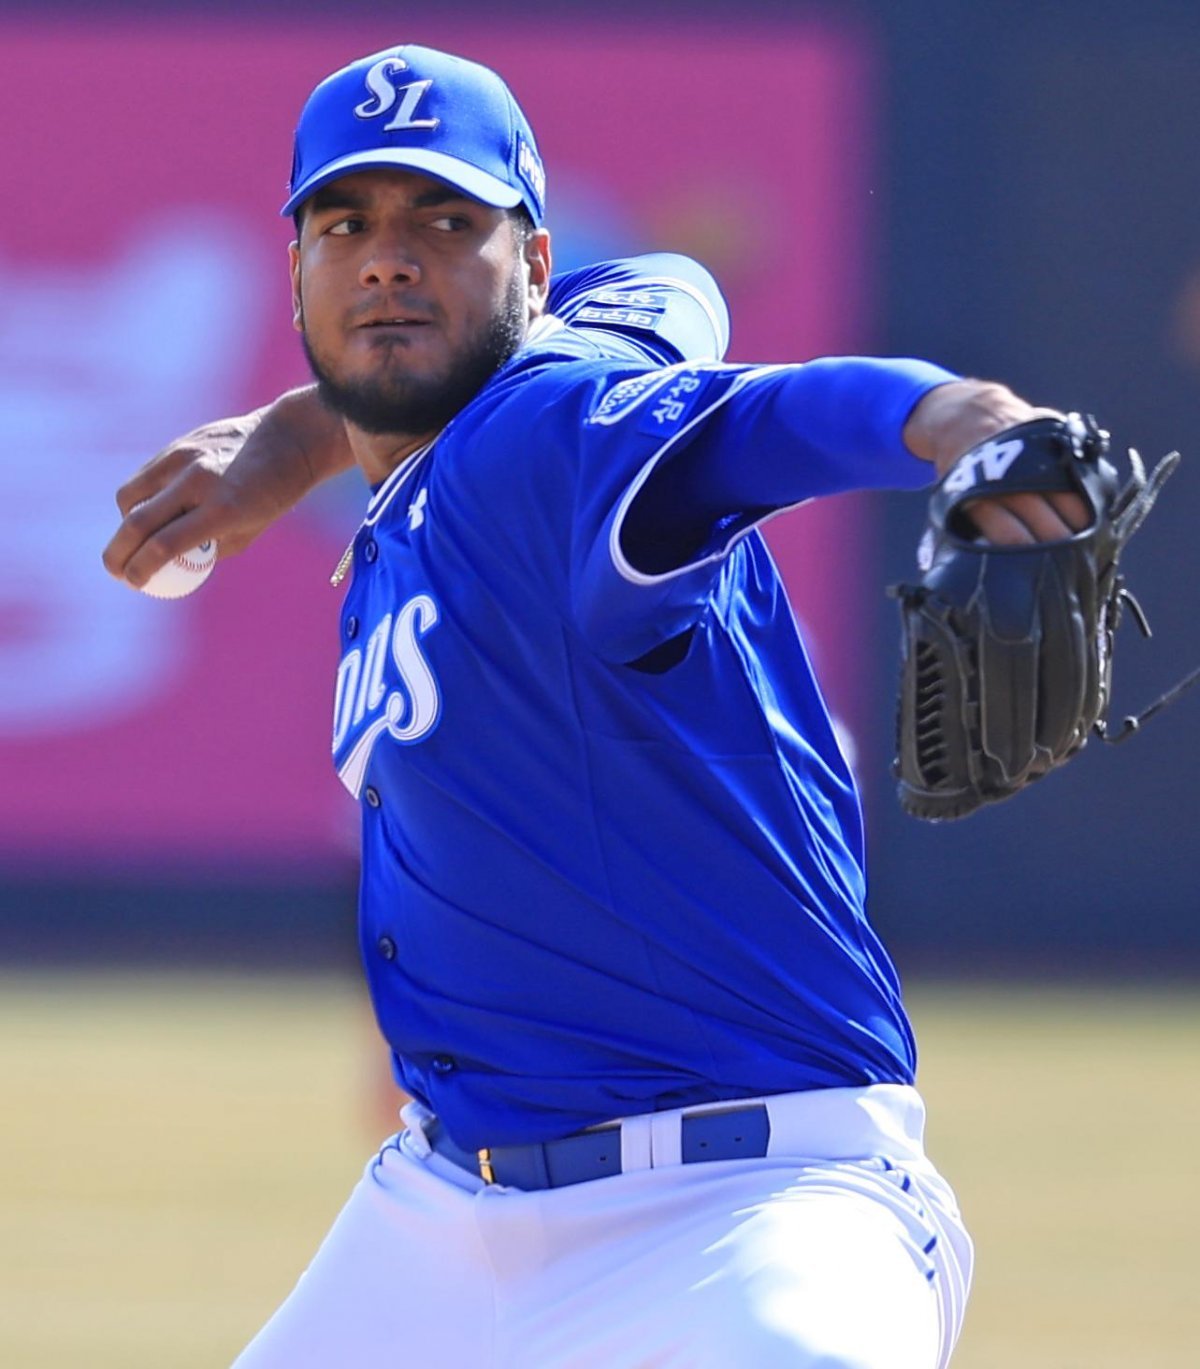 Denny Reyes (Dominican Republic) Age: 28 Height and weight: 198cm, 113kg 1-year contract Total: $800,000 (approximately KRW 1.07 billion) MLB performance: 12 games, 2 losses, ERA 6.26